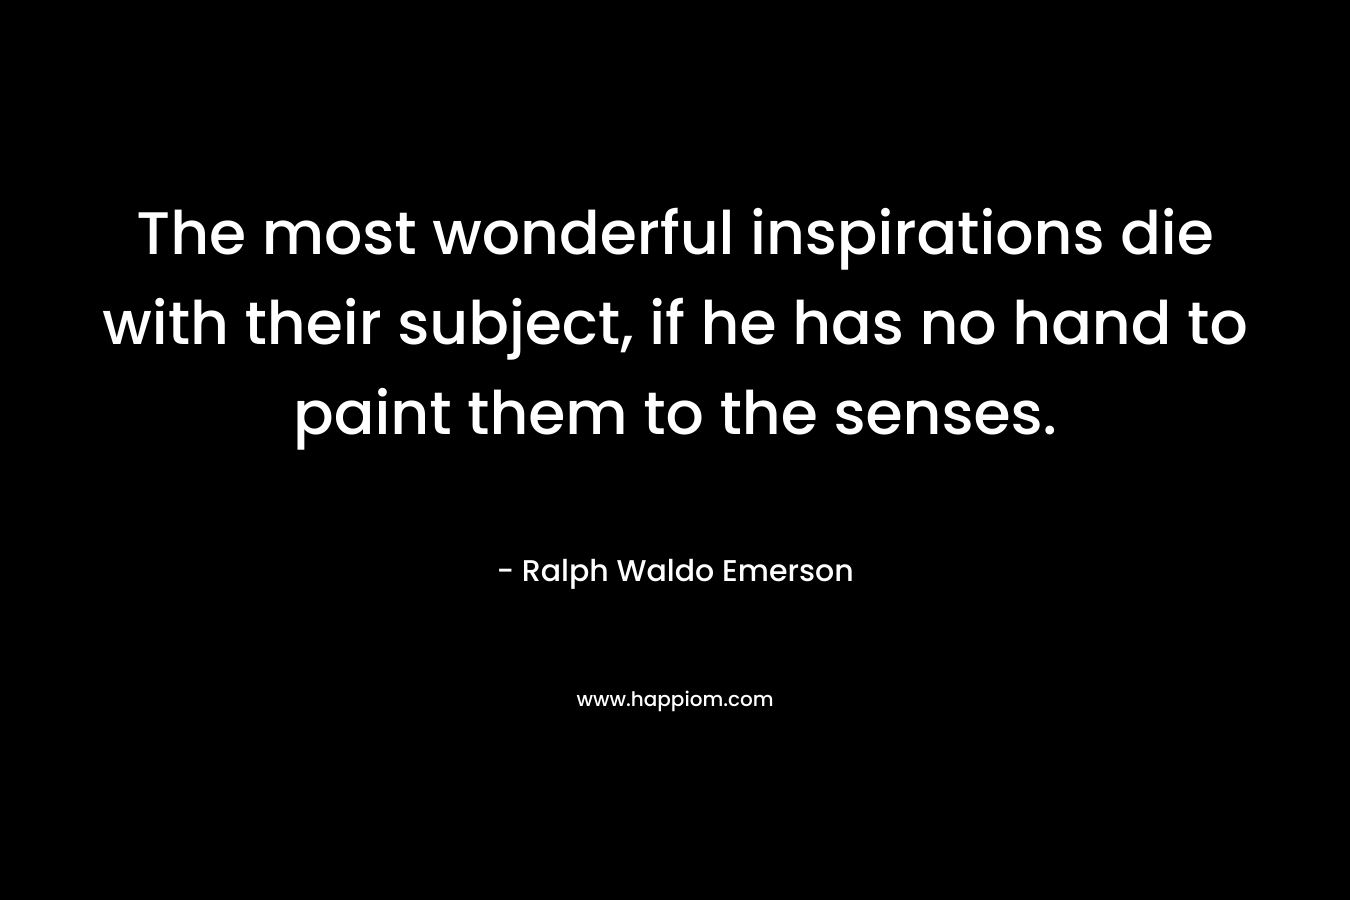 The most wonderful inspirations die with their subject, if he has no hand to paint them to the senses.